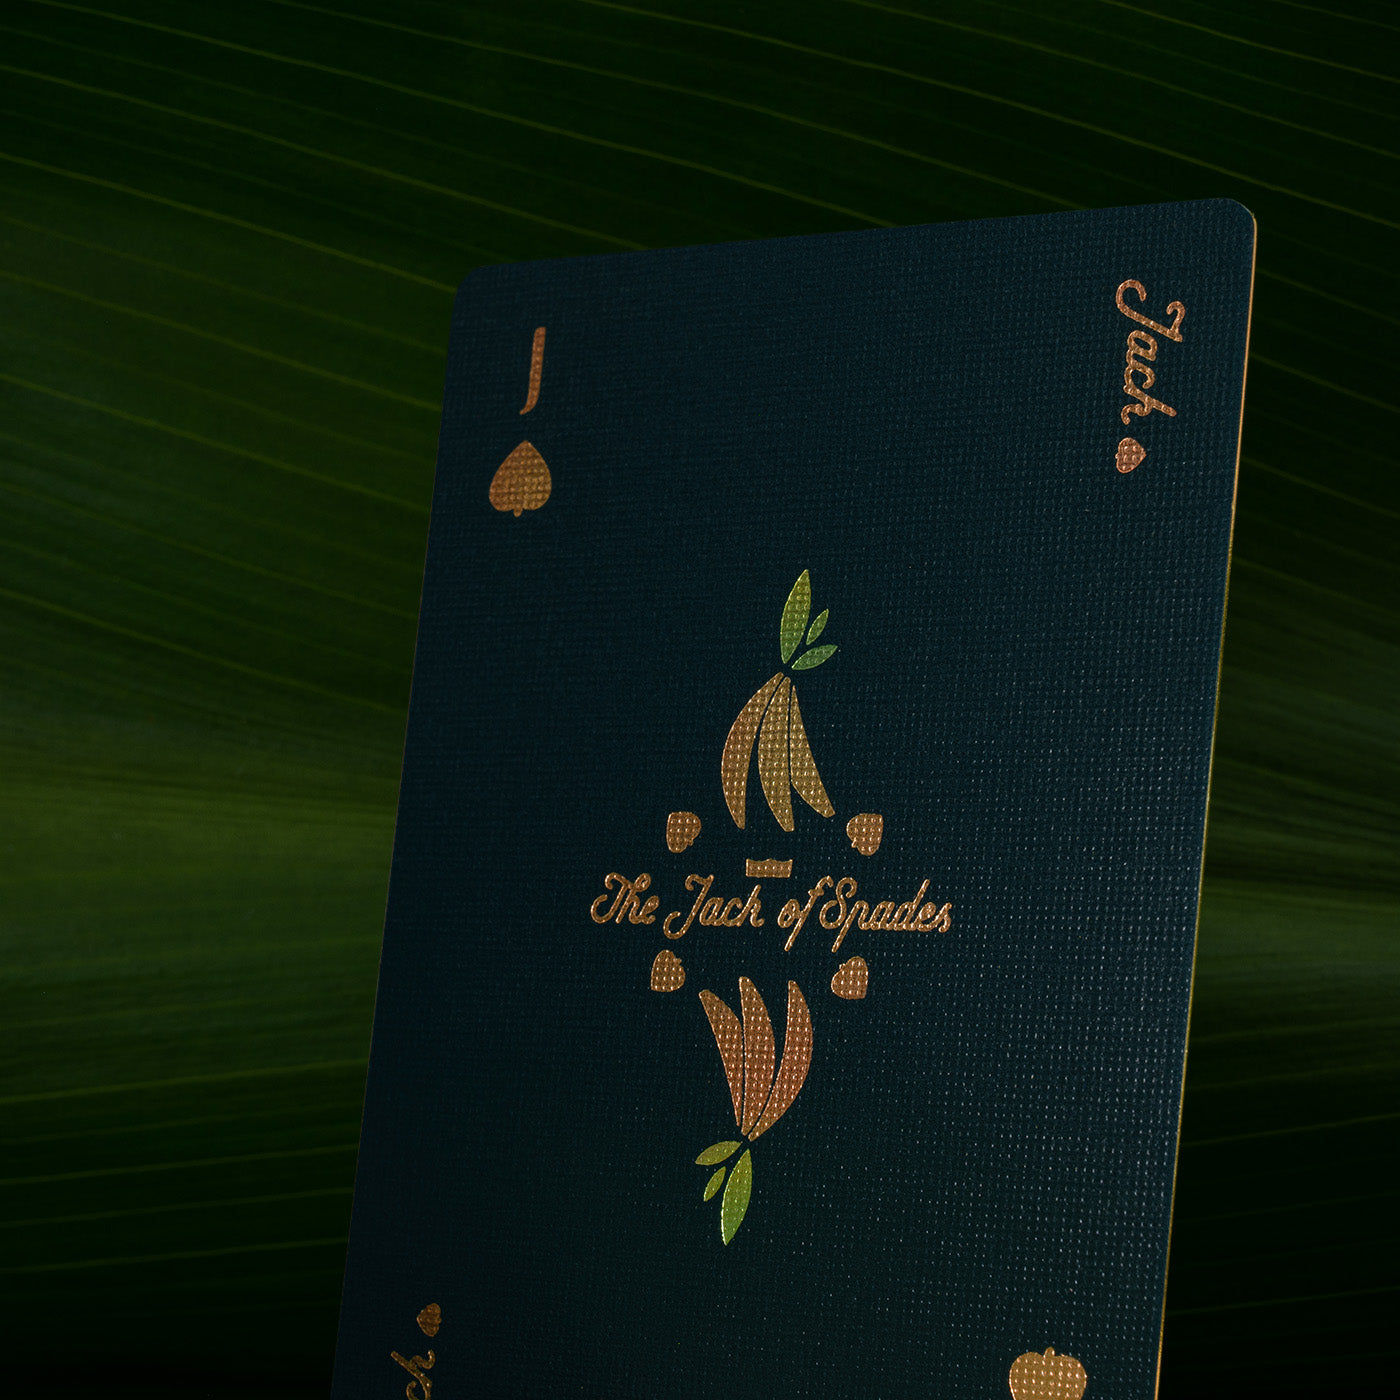 A playing card against a backdrop of palm fronds